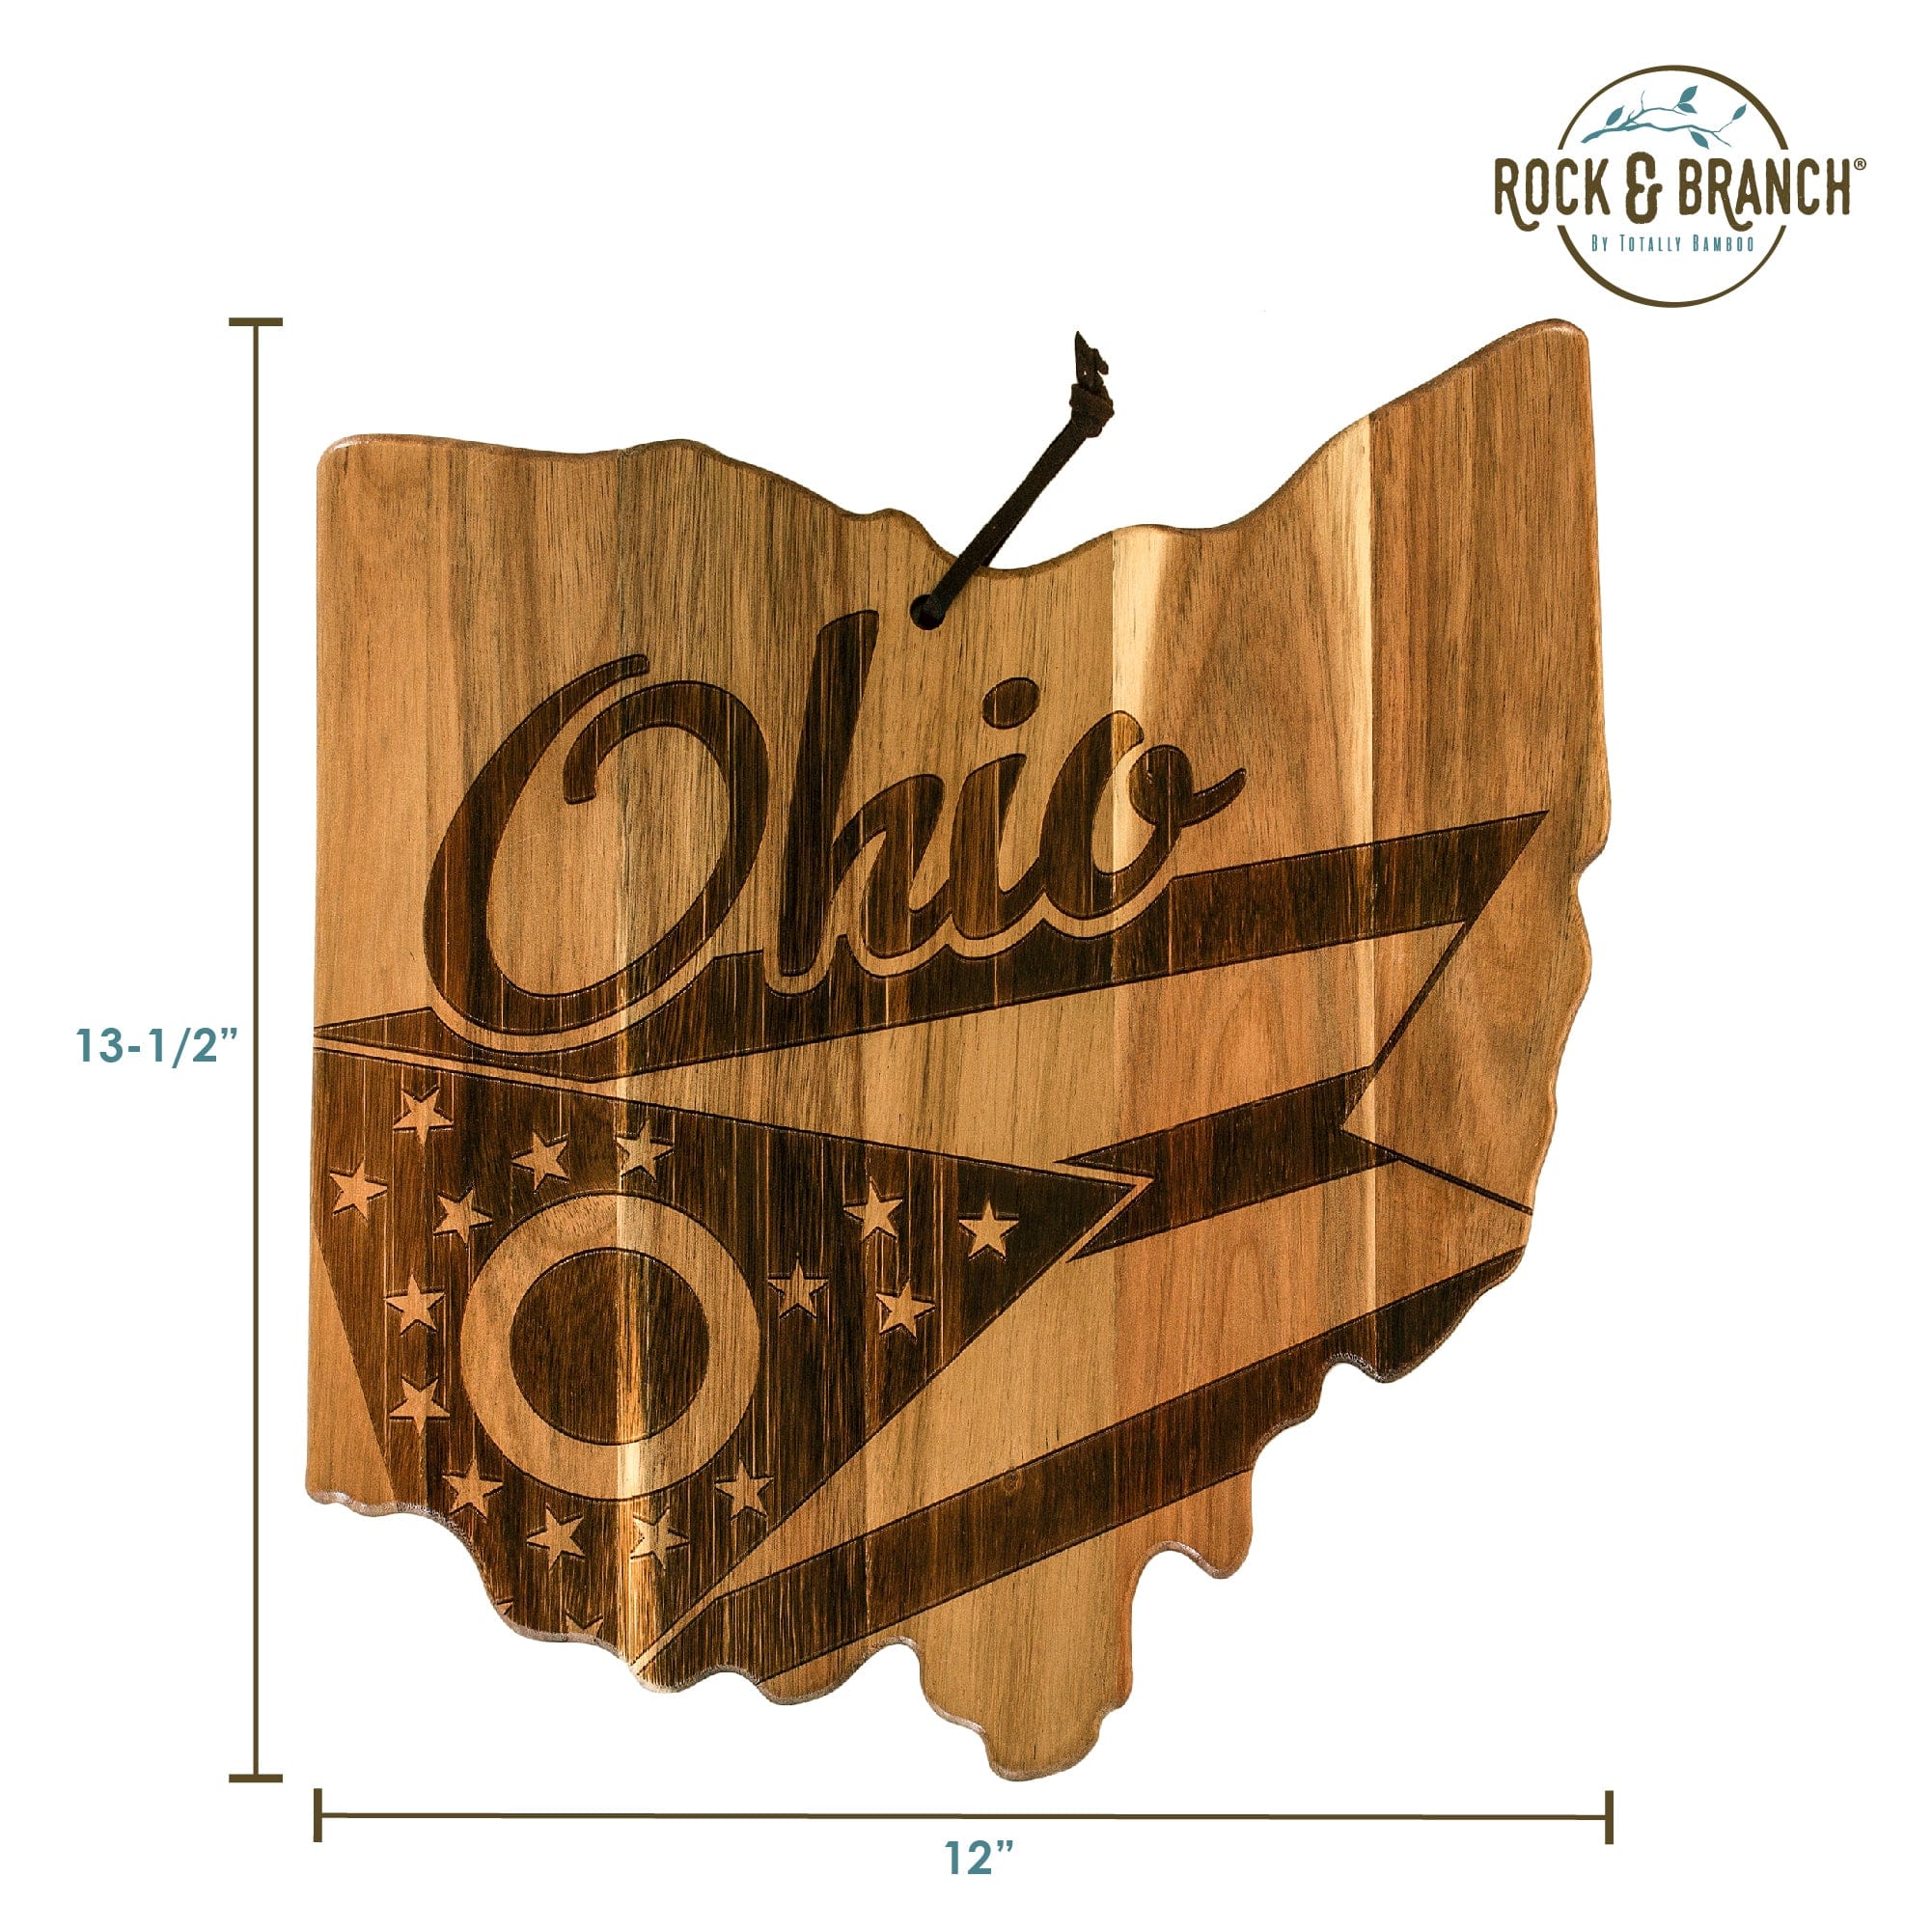 Totally Bamboo Rock & Branch® Origins Series Ohio State Shaped Cutting & Serving Board